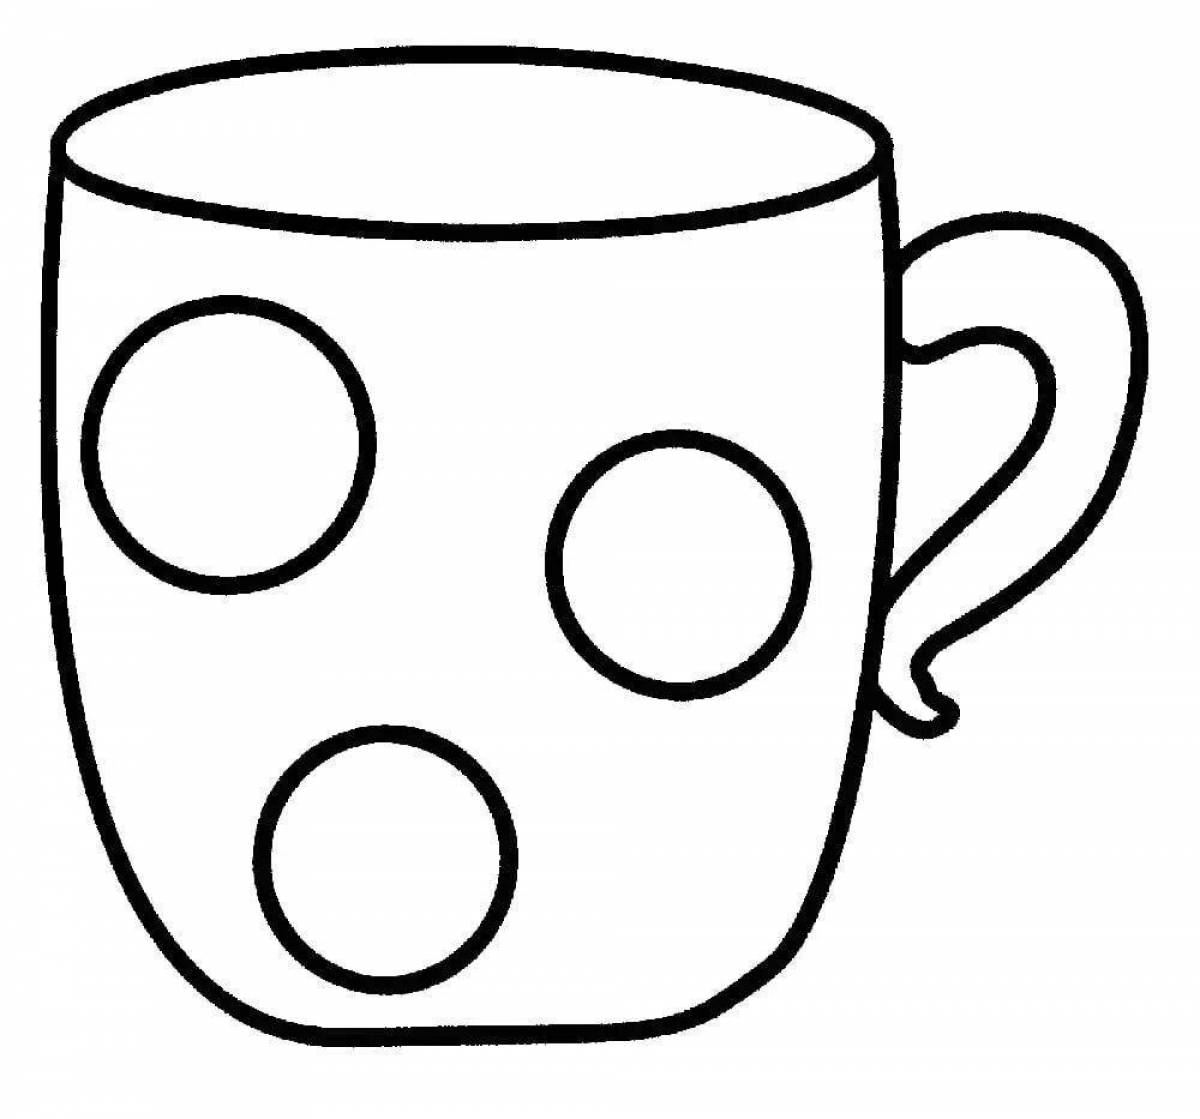 Coloring page with colorful cup pattern